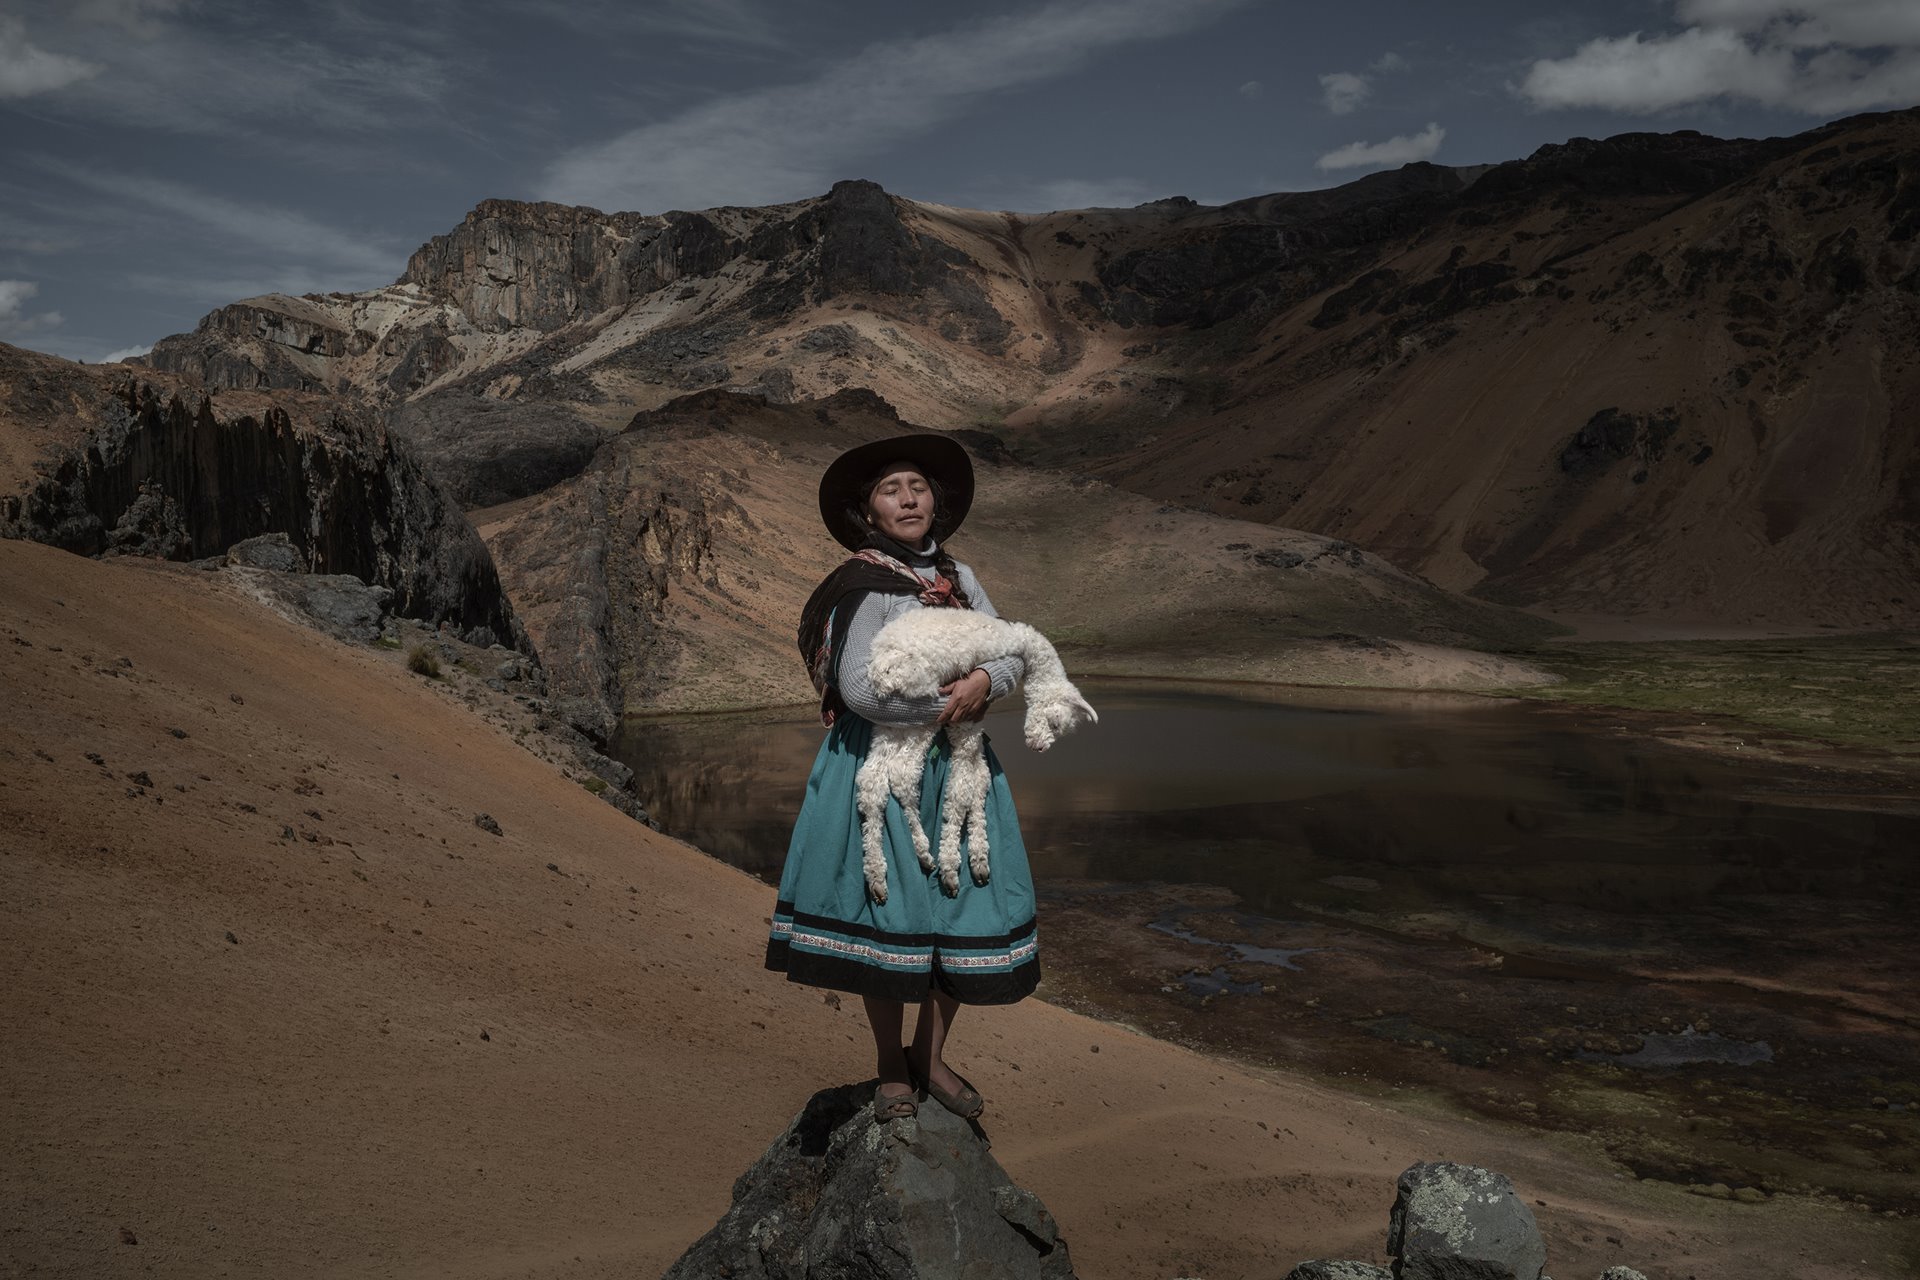 <p>Alina Surquislla Gomez, a third-generation <em>alpaquera </em>(alpaca-farmer), cradles a baby alpaca on the way to her family&rsquo;s summer pastures, in Oropesa, Peru. The climate crisis is forcing herders, many of whom are women, to search for new pastures, often in difficult terrain.</p>
